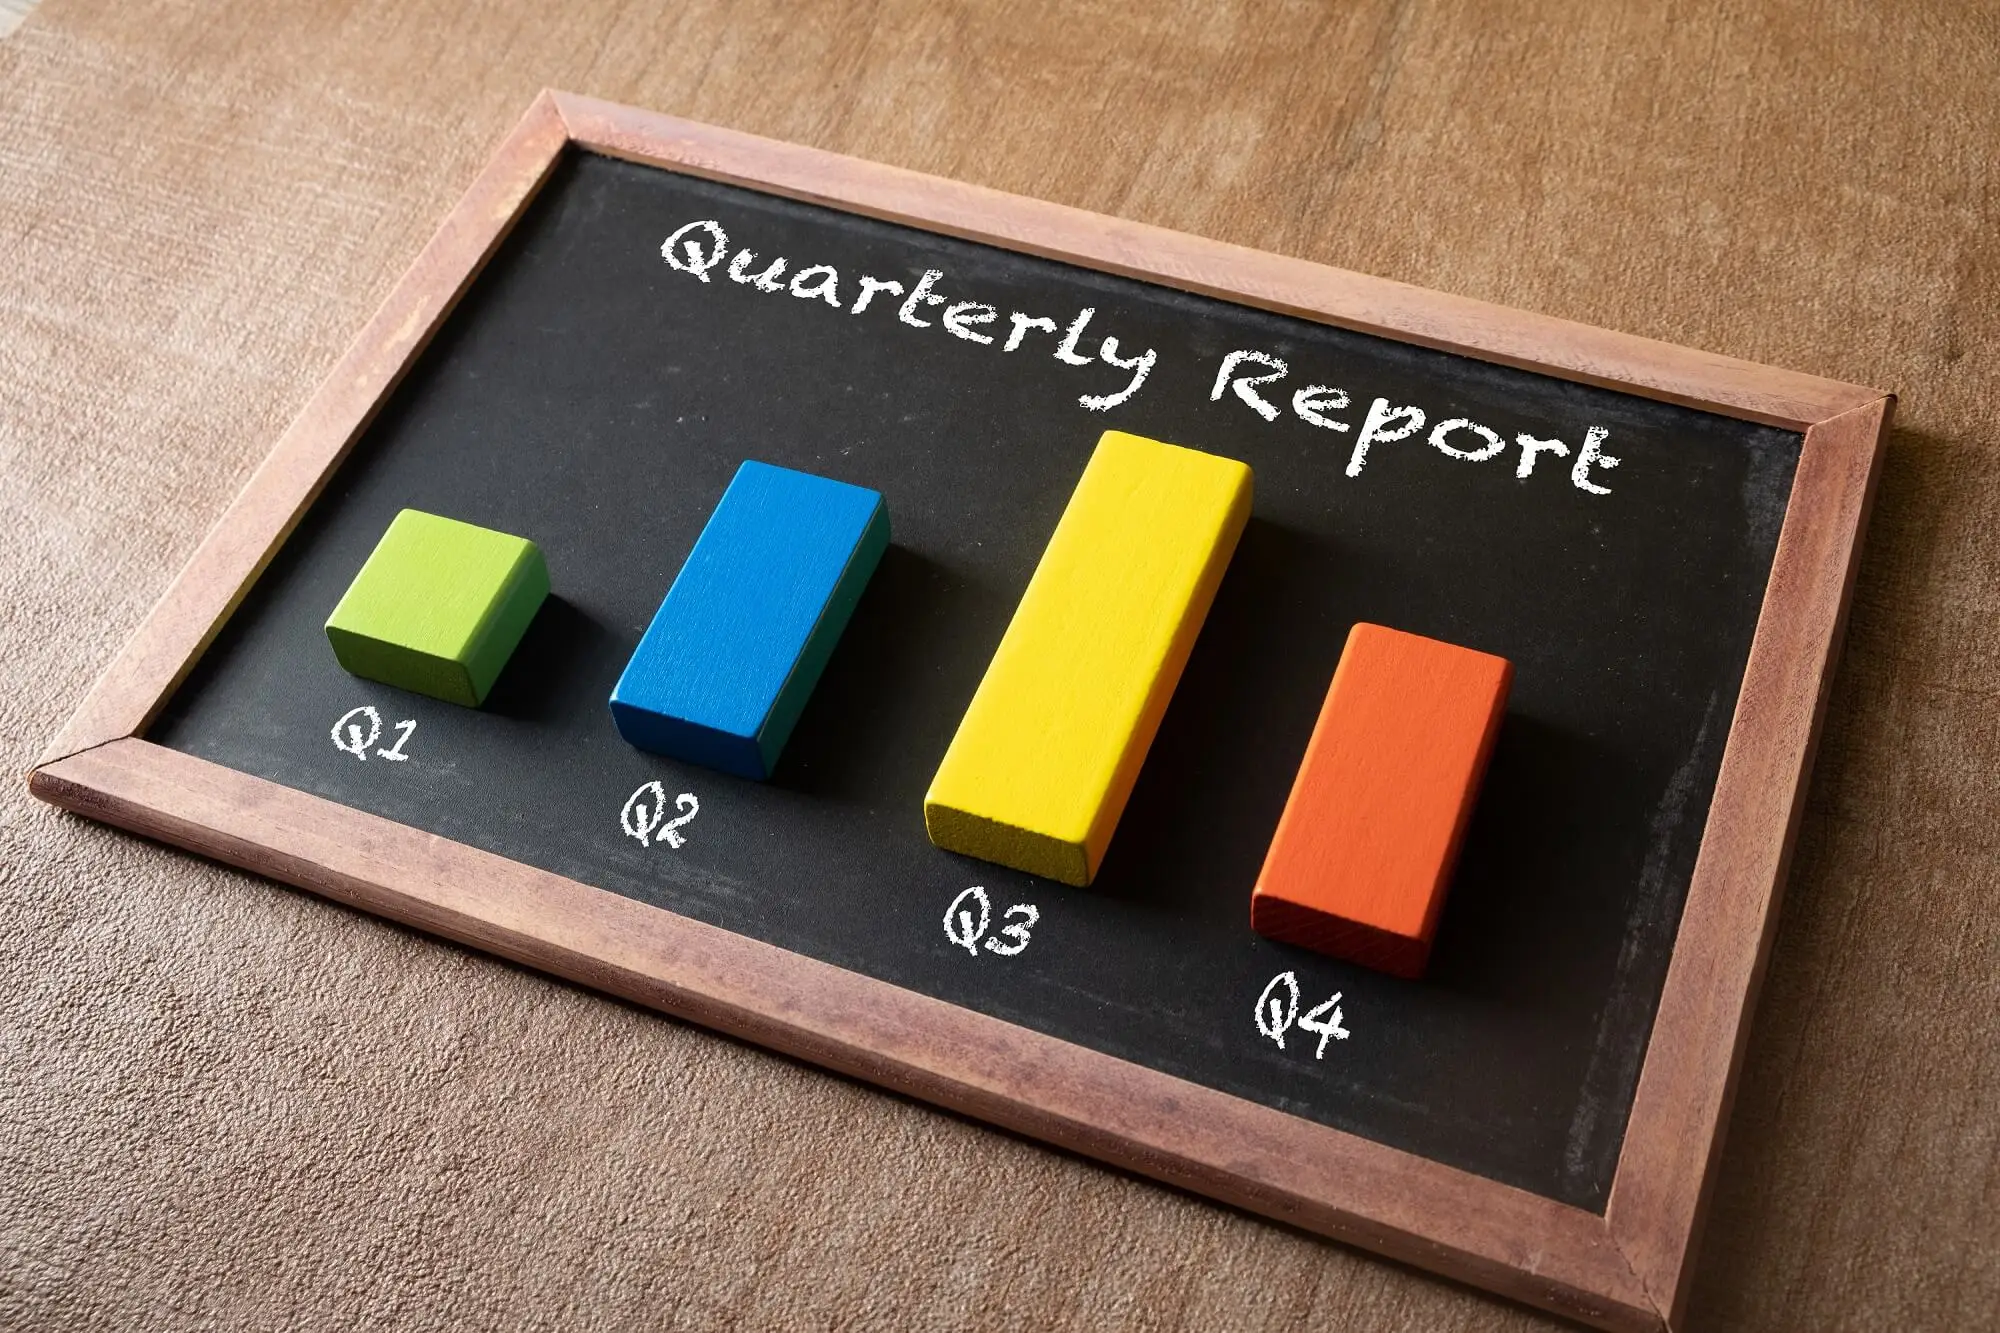 It's important for companies to release quarterly reports